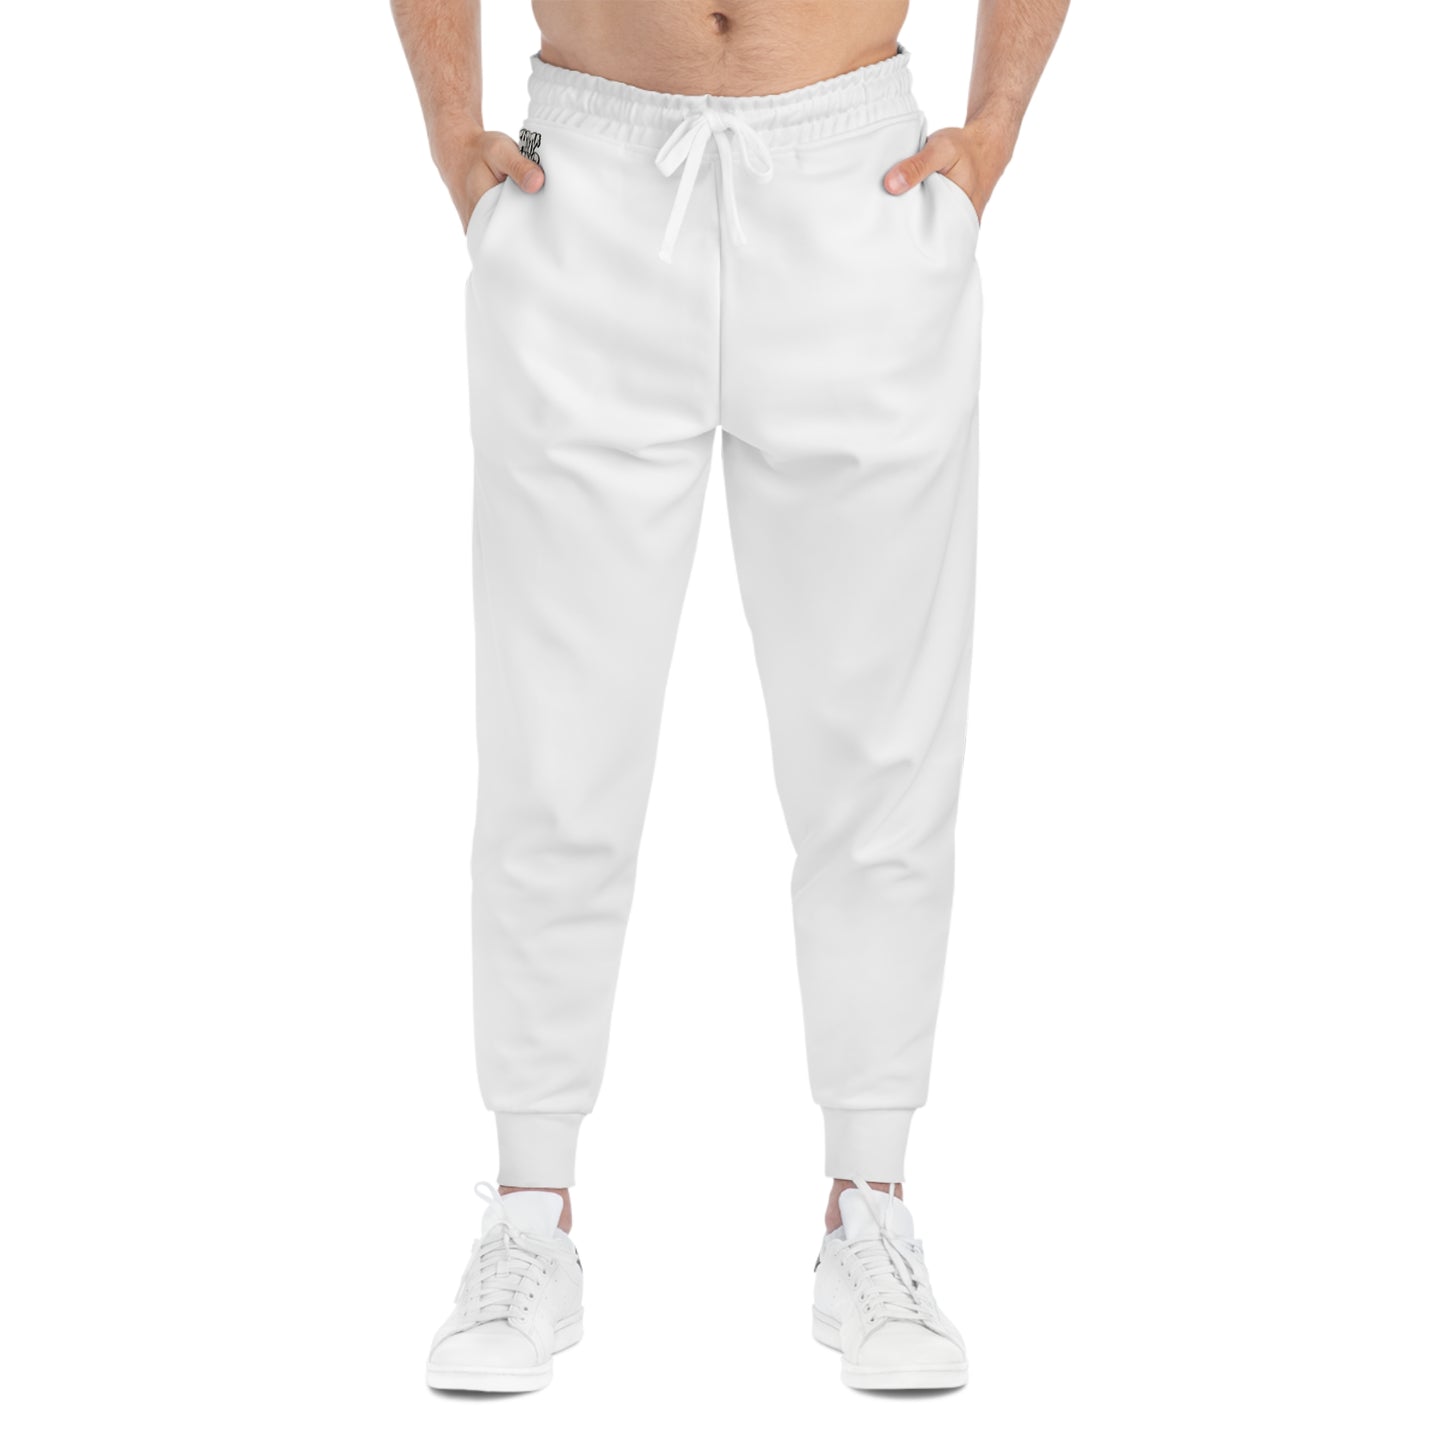 Official Shiftyvandalz joggers (Images switched)